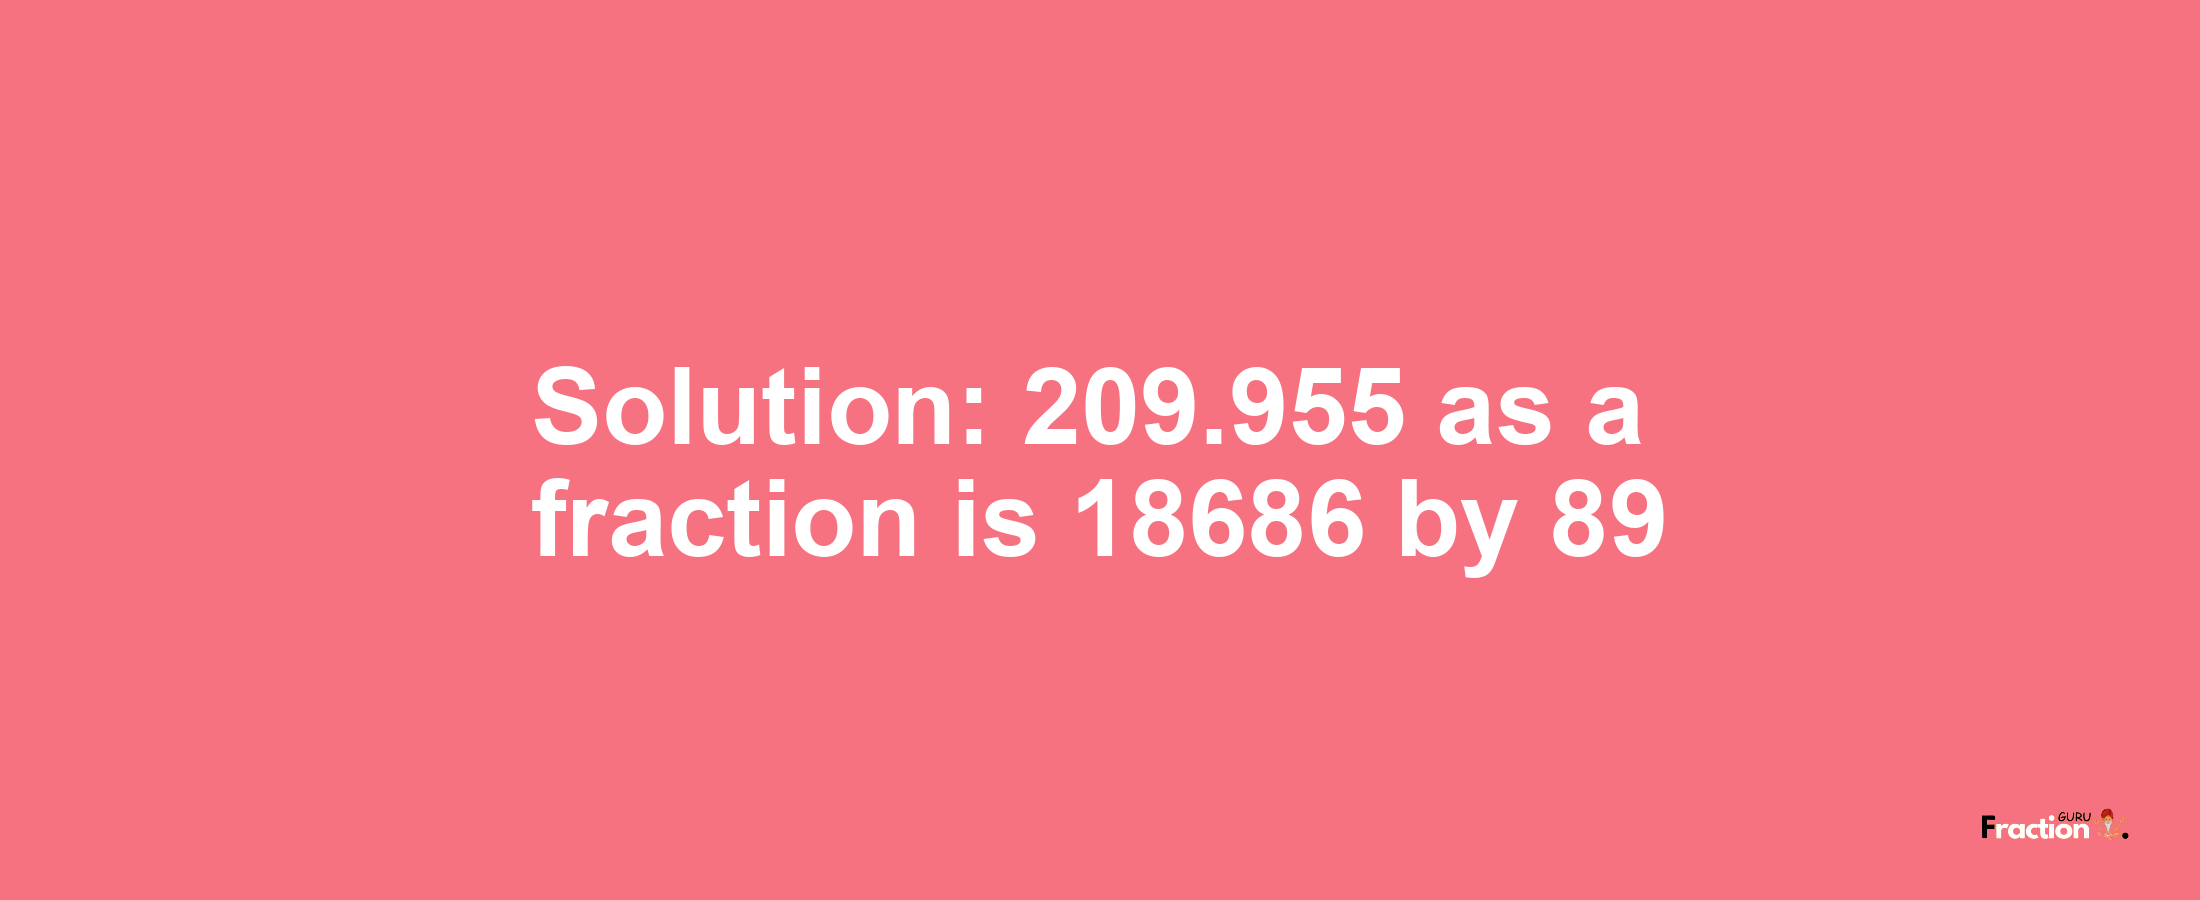 Solution:209.955 as a fraction is 18686/89